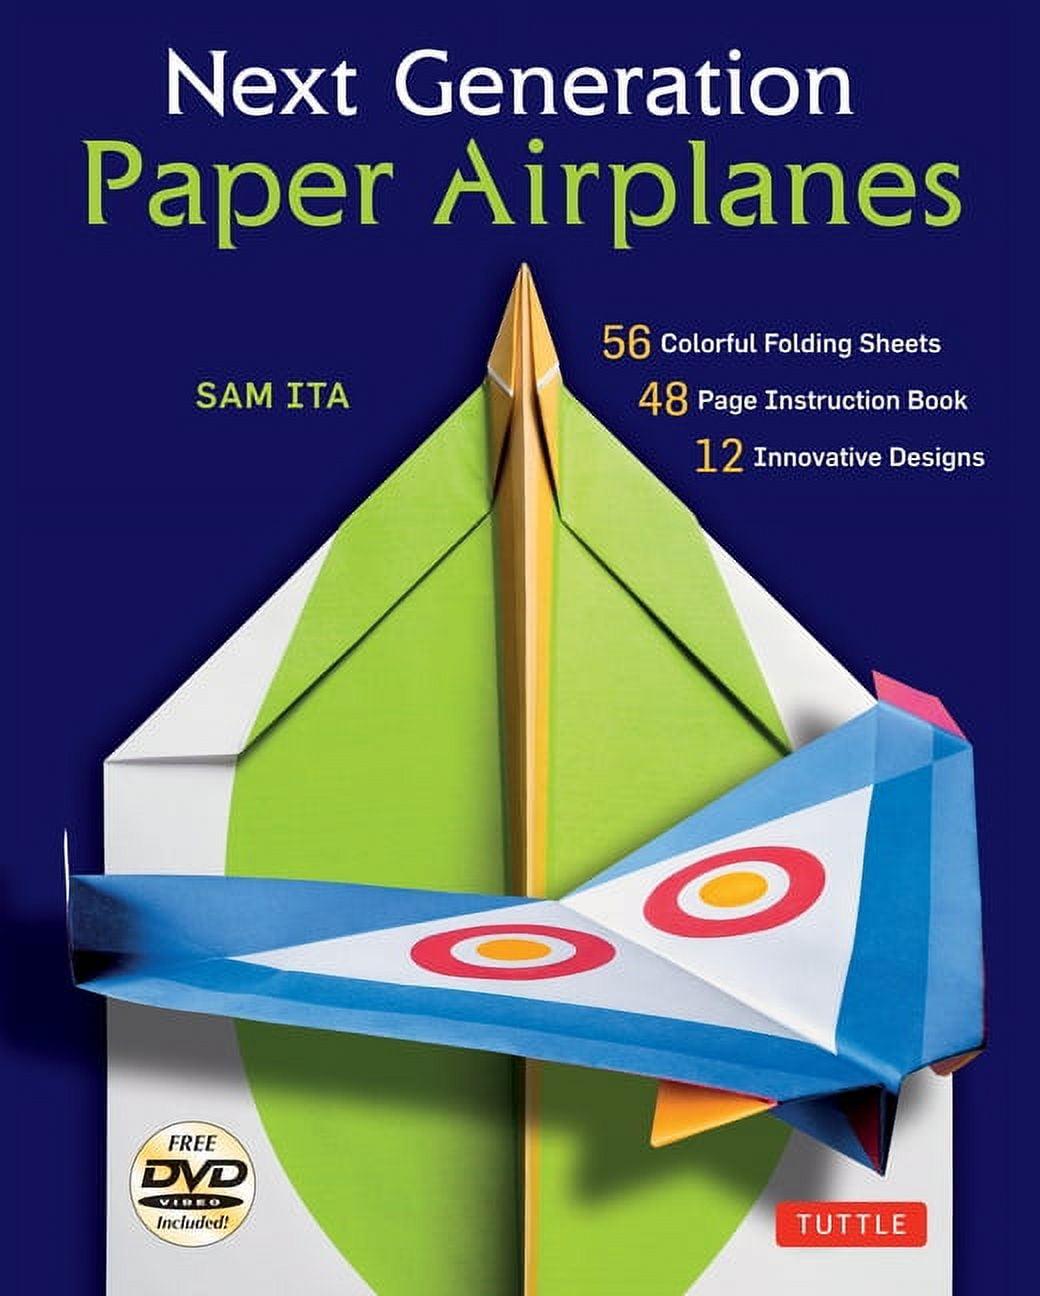 POWERUP 2.0 Origami Artist Kit- Electric Motor Paper Airplane & 10 Paper  Airplane Folding Templates, STEM Kit and Fun School Project- Perfect for